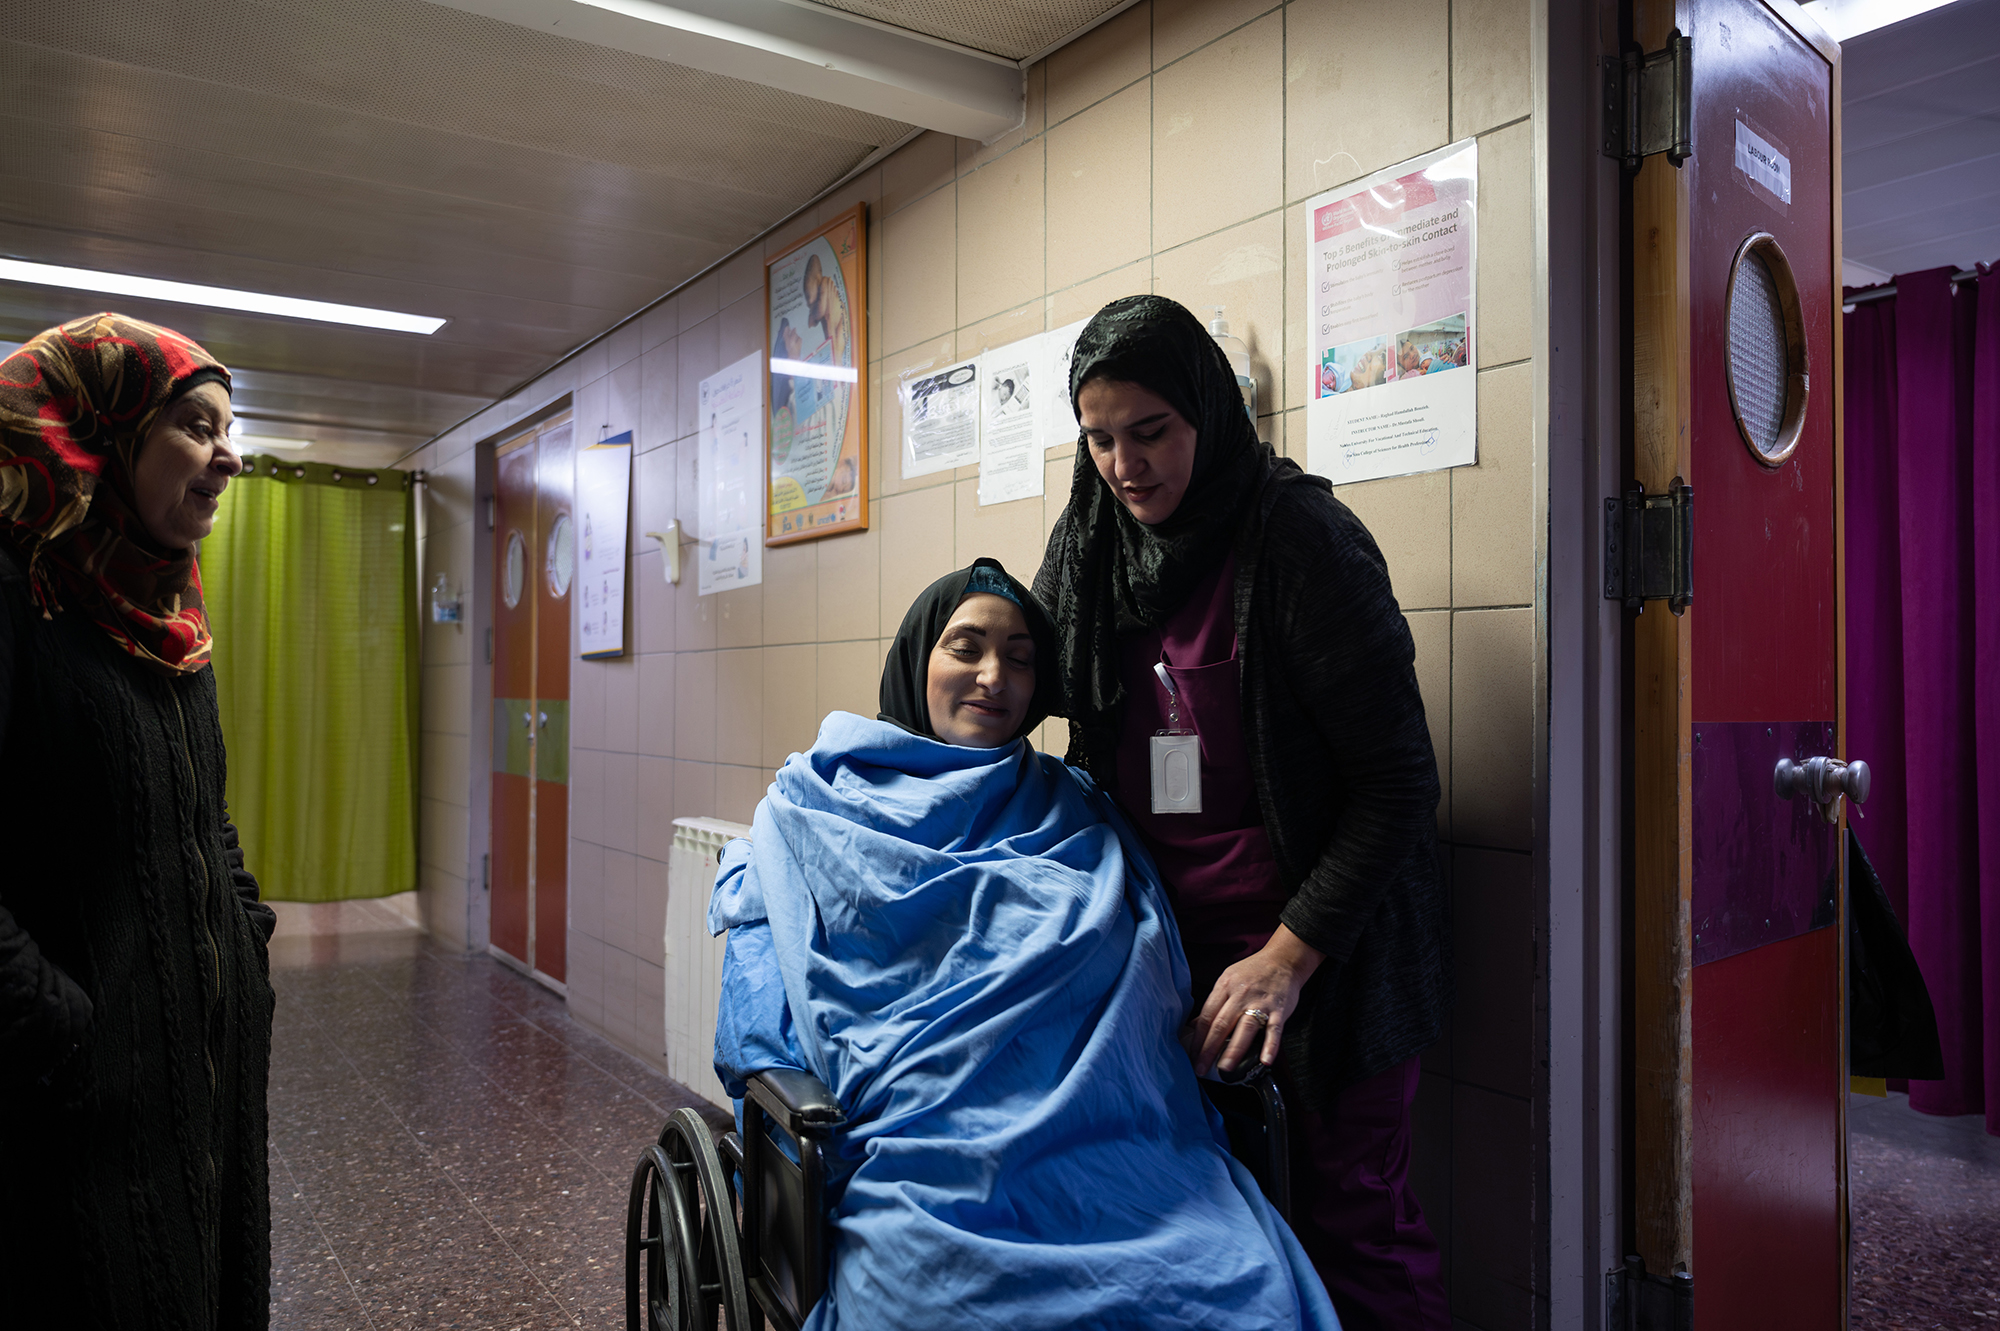 A woman with her eyes closed, sitting in a wheelchair in a hospital. Another woman is standing next to her. A third woman looks on from the left of the frame.